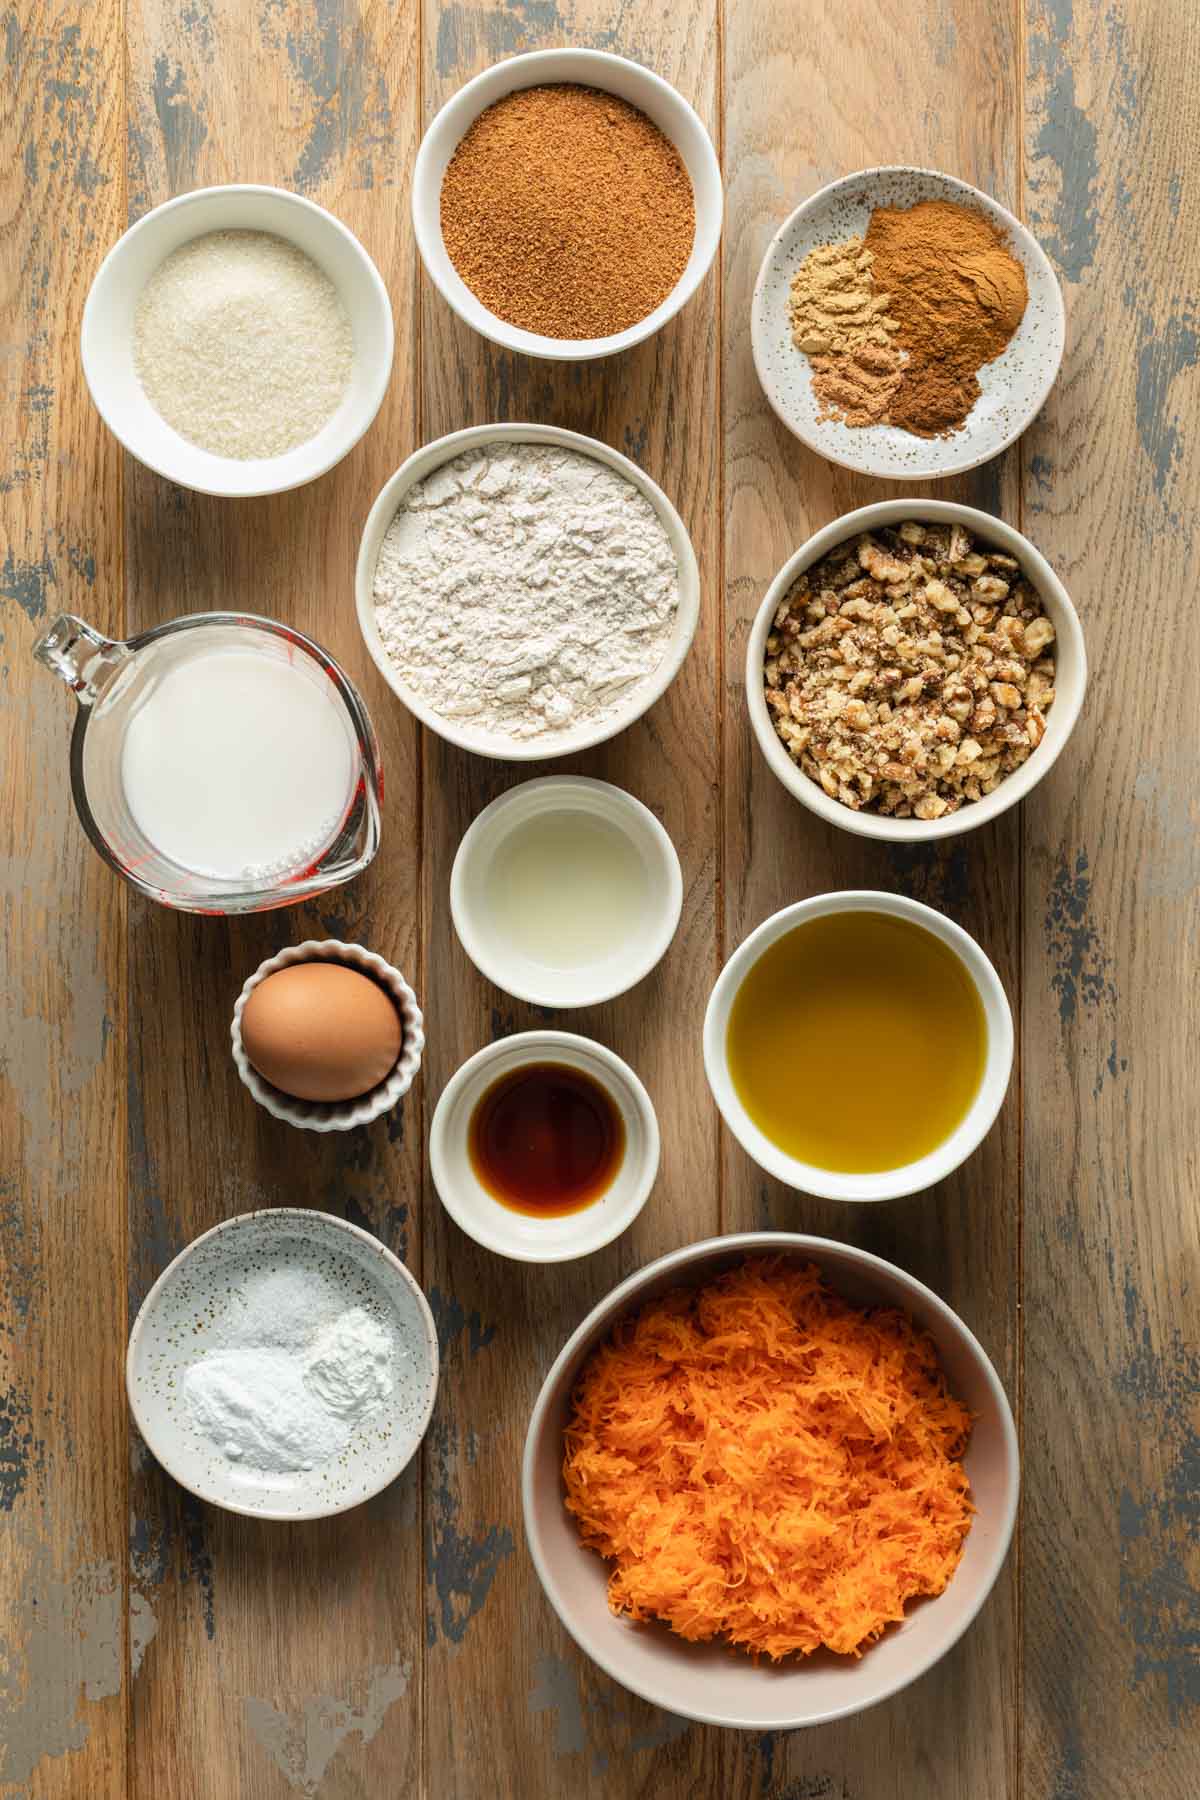 Ingredients to make this small carrot cake recipe arranged individually on a wooden table surface.